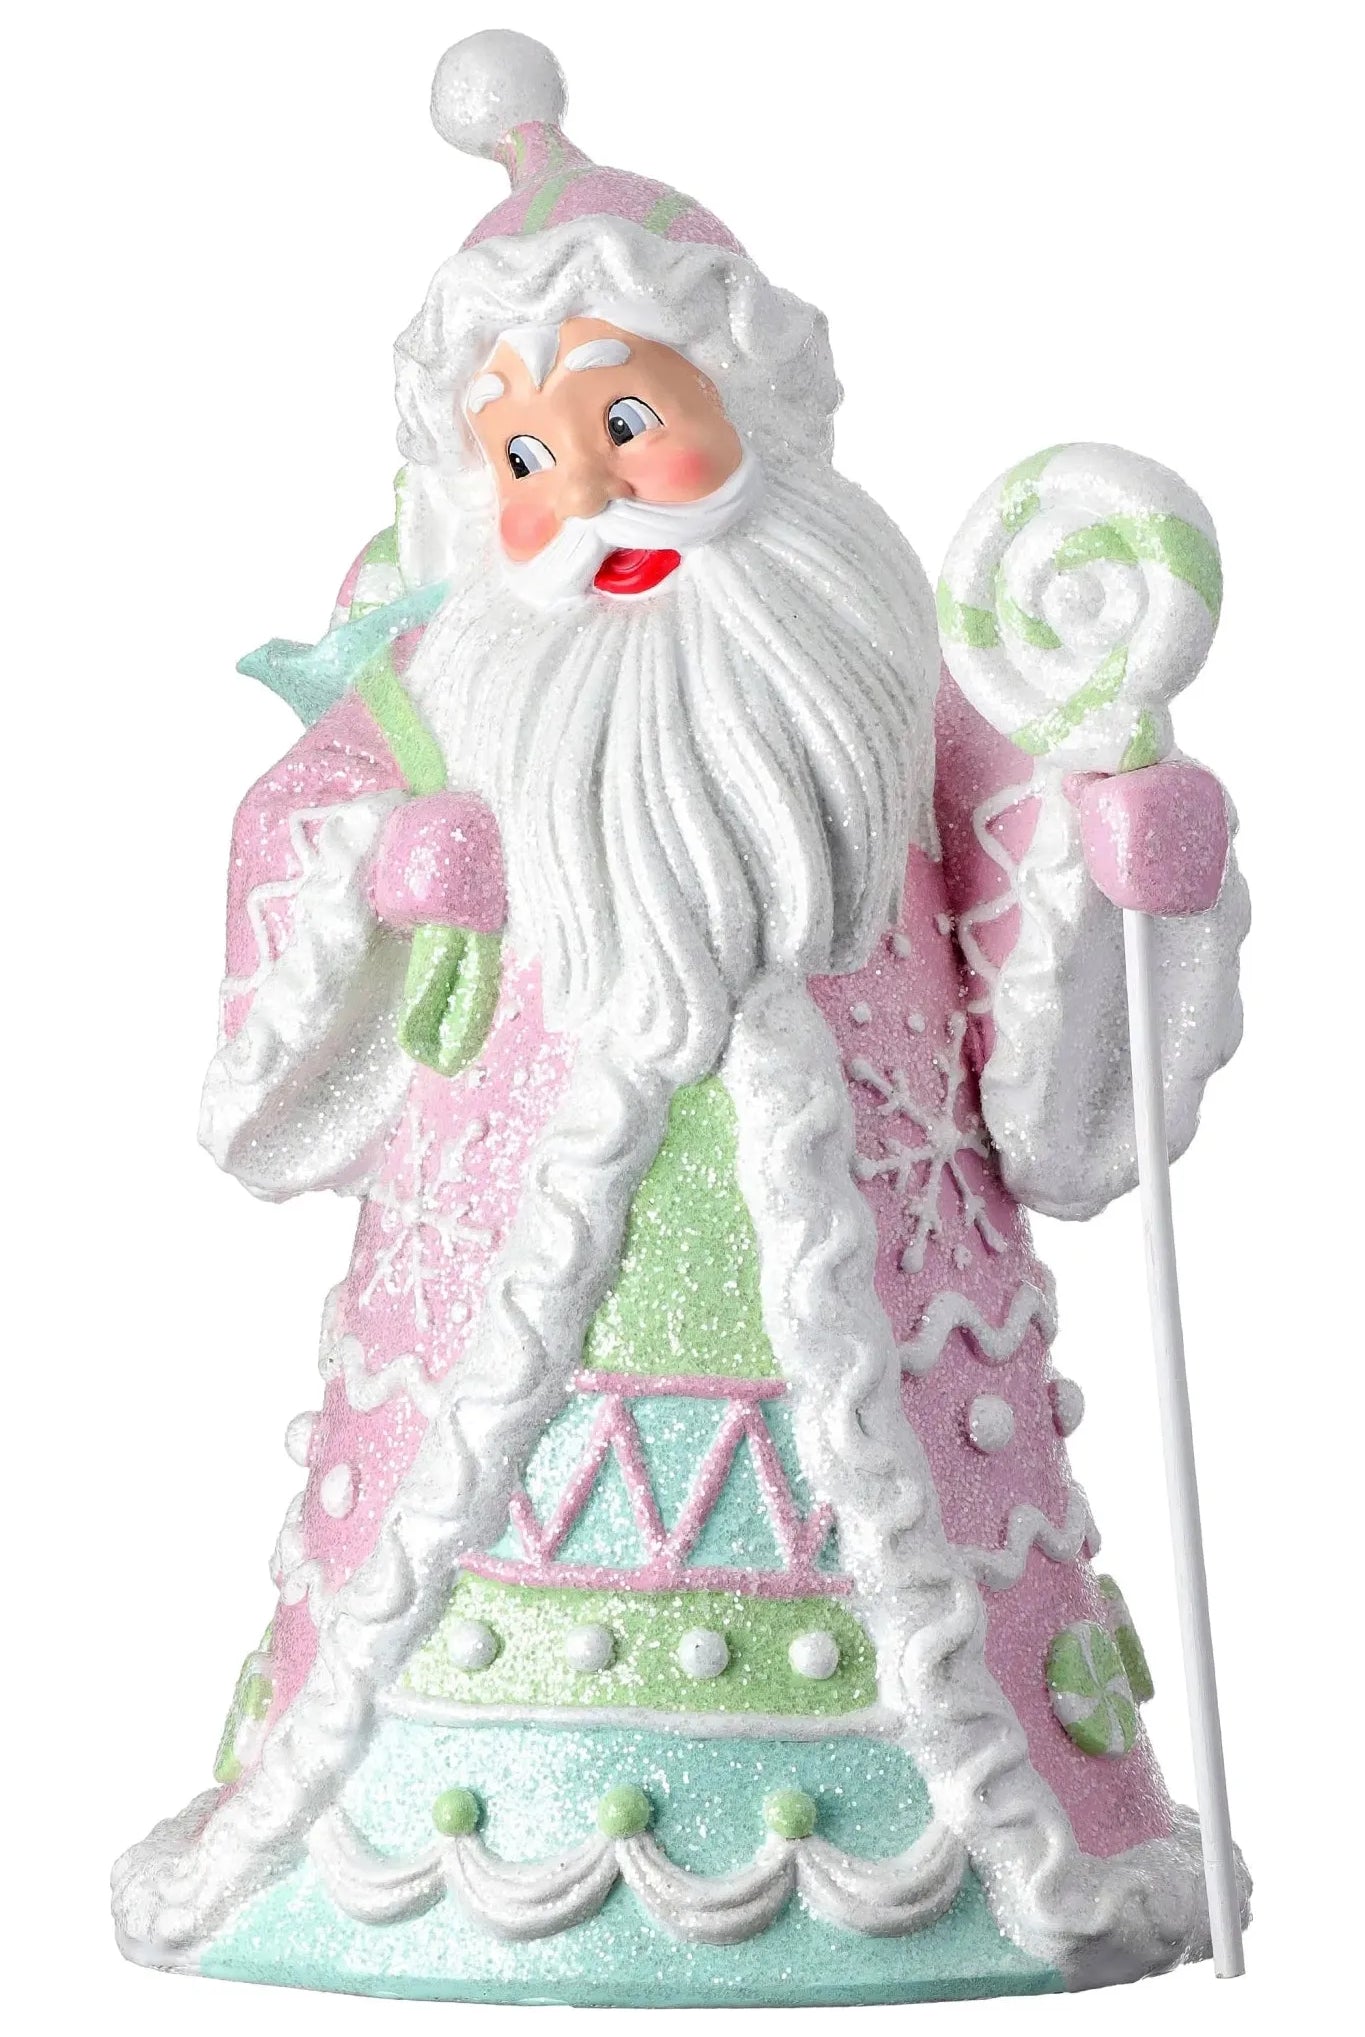 Shop For 18" Resin Candylicious Snowman: Pastel MTX69049